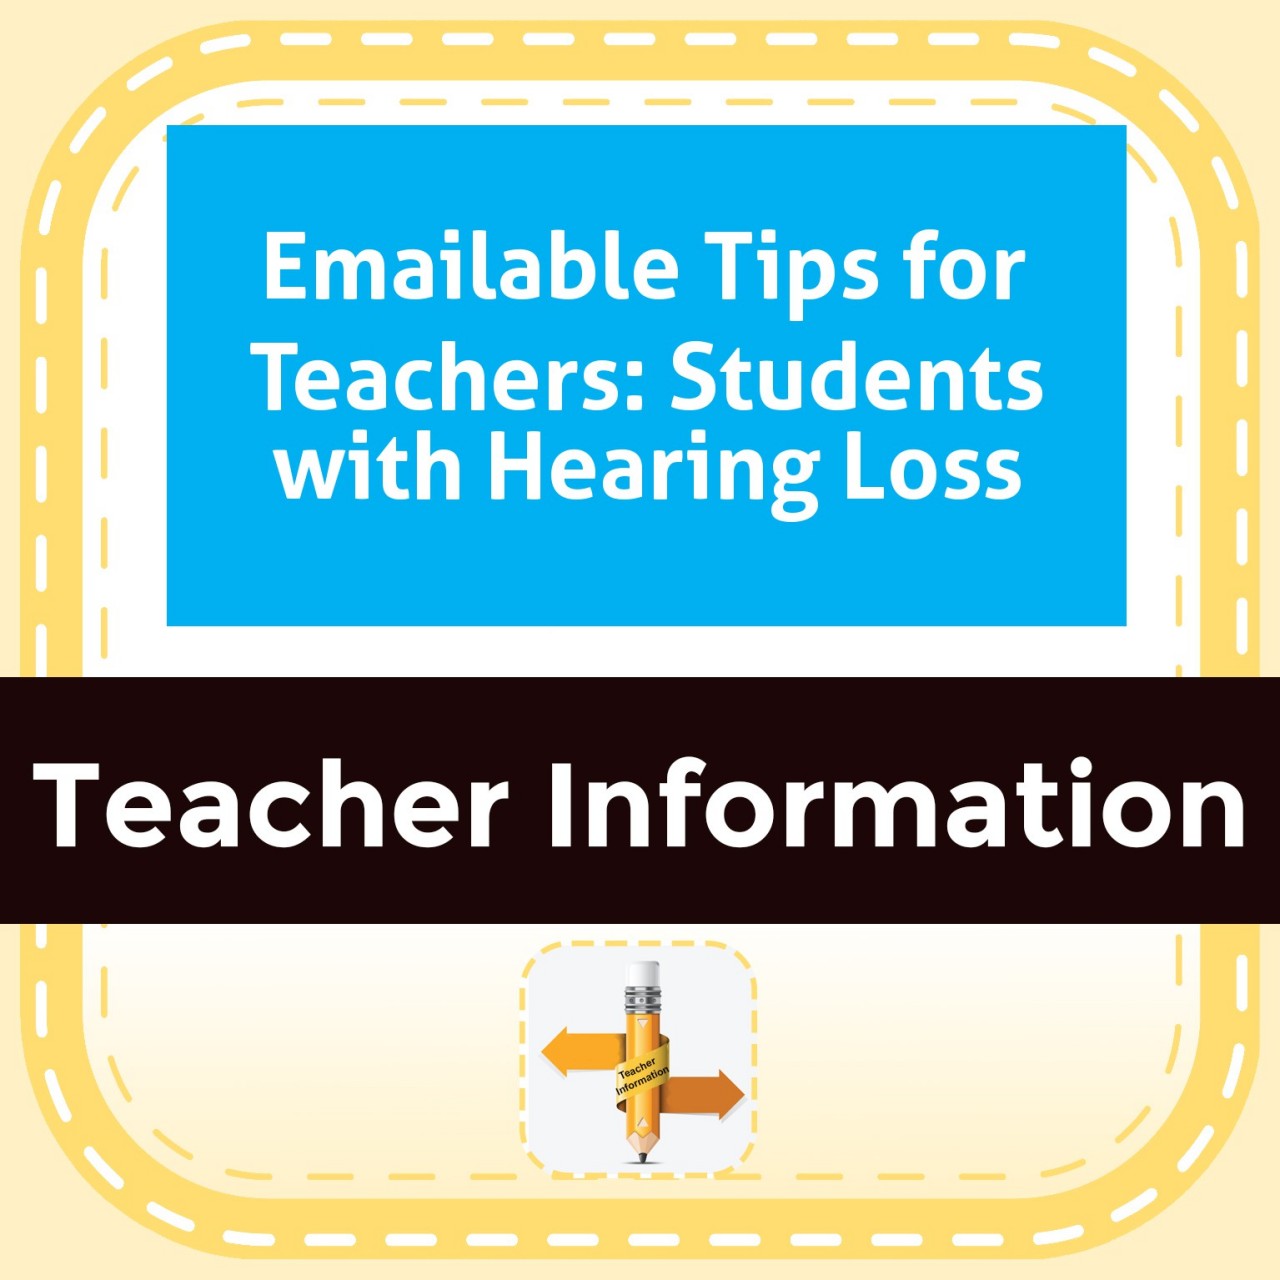 Emailable Tips for Teachers: Students with Hearing Loss